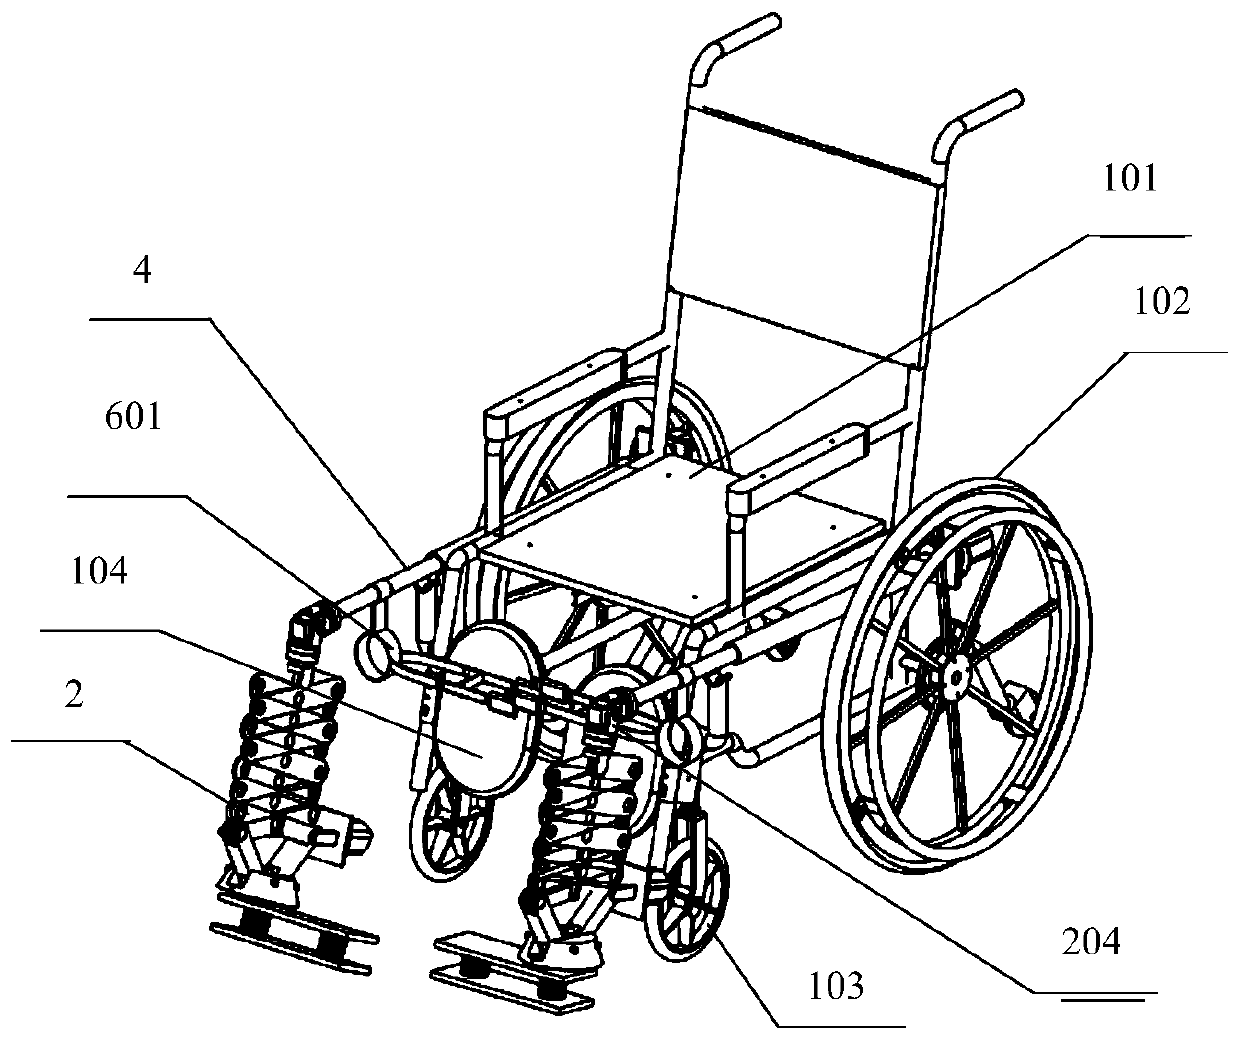 Automatic lifting and assisting-type aged-helping wheelchair